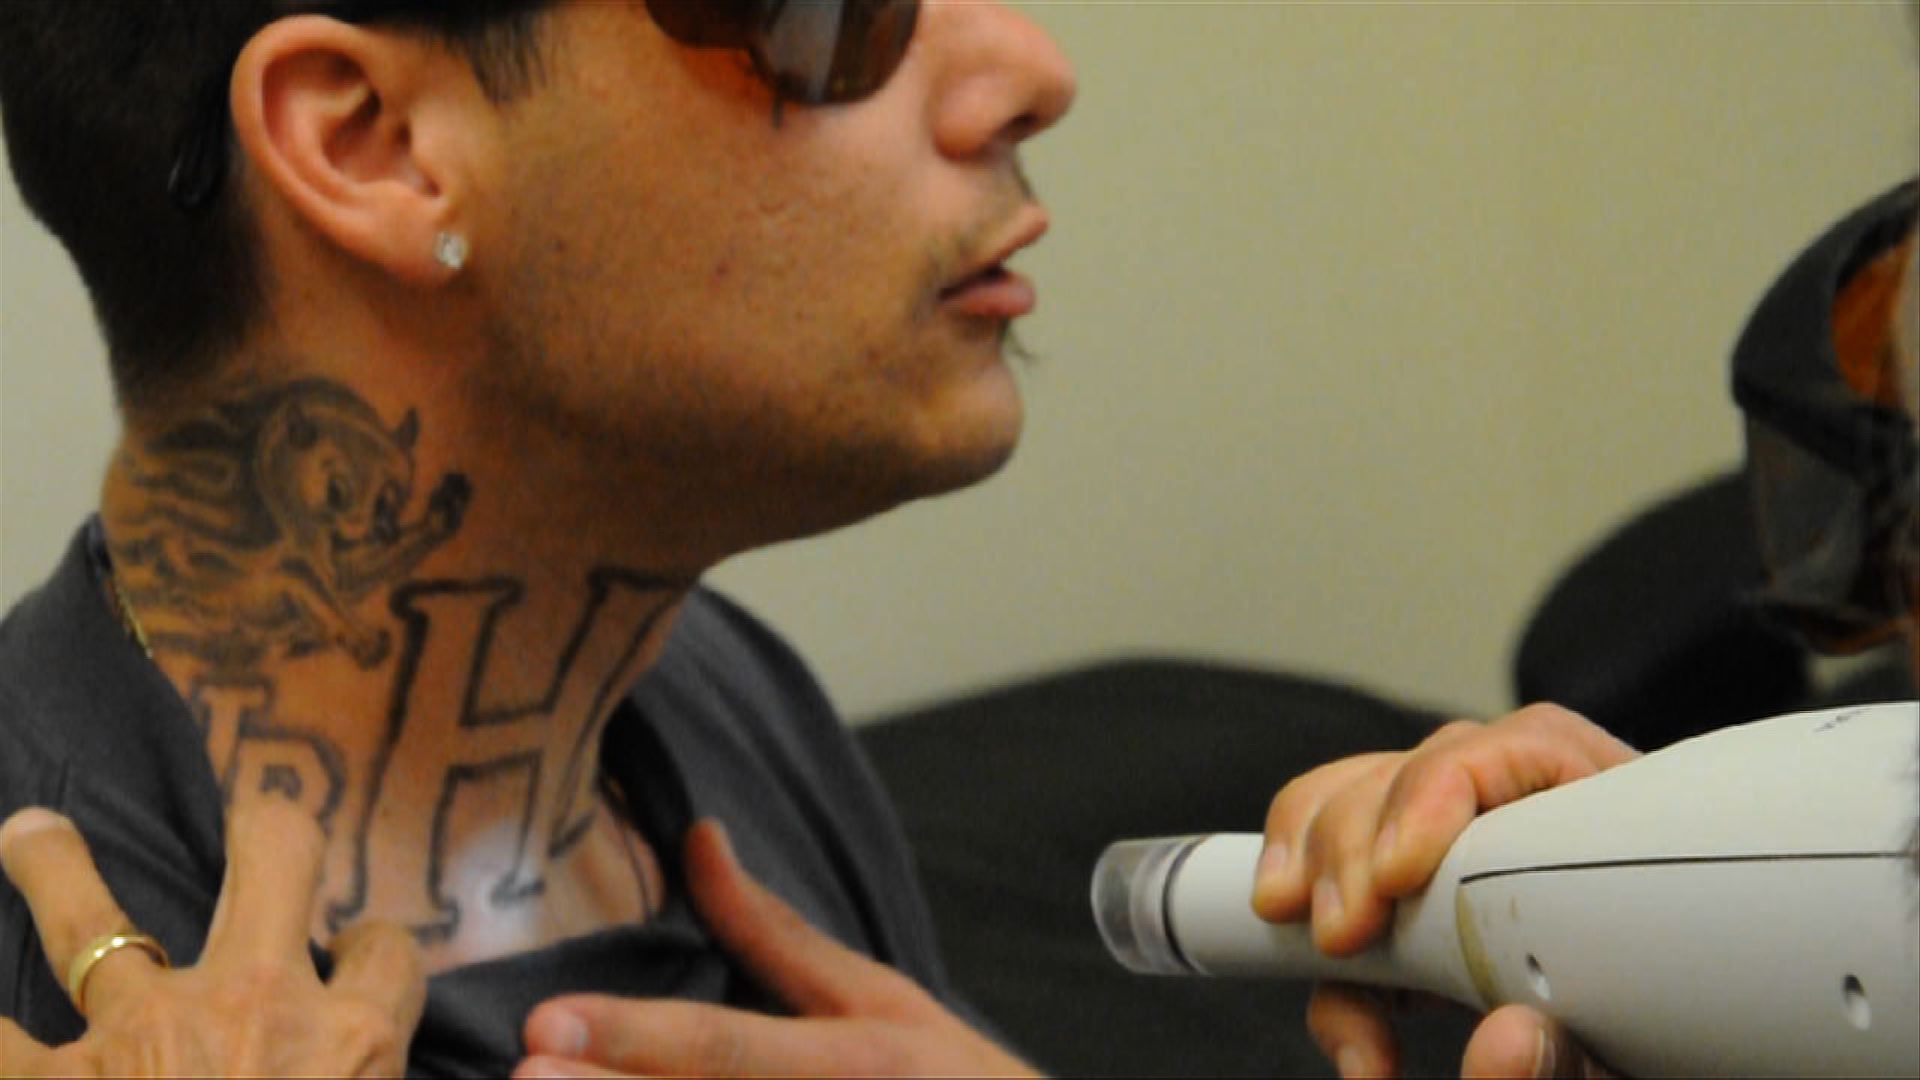 Gabriel Hinojos 29 receives tattoo removal laser surgery at Homeboy  Industries by volunteering do